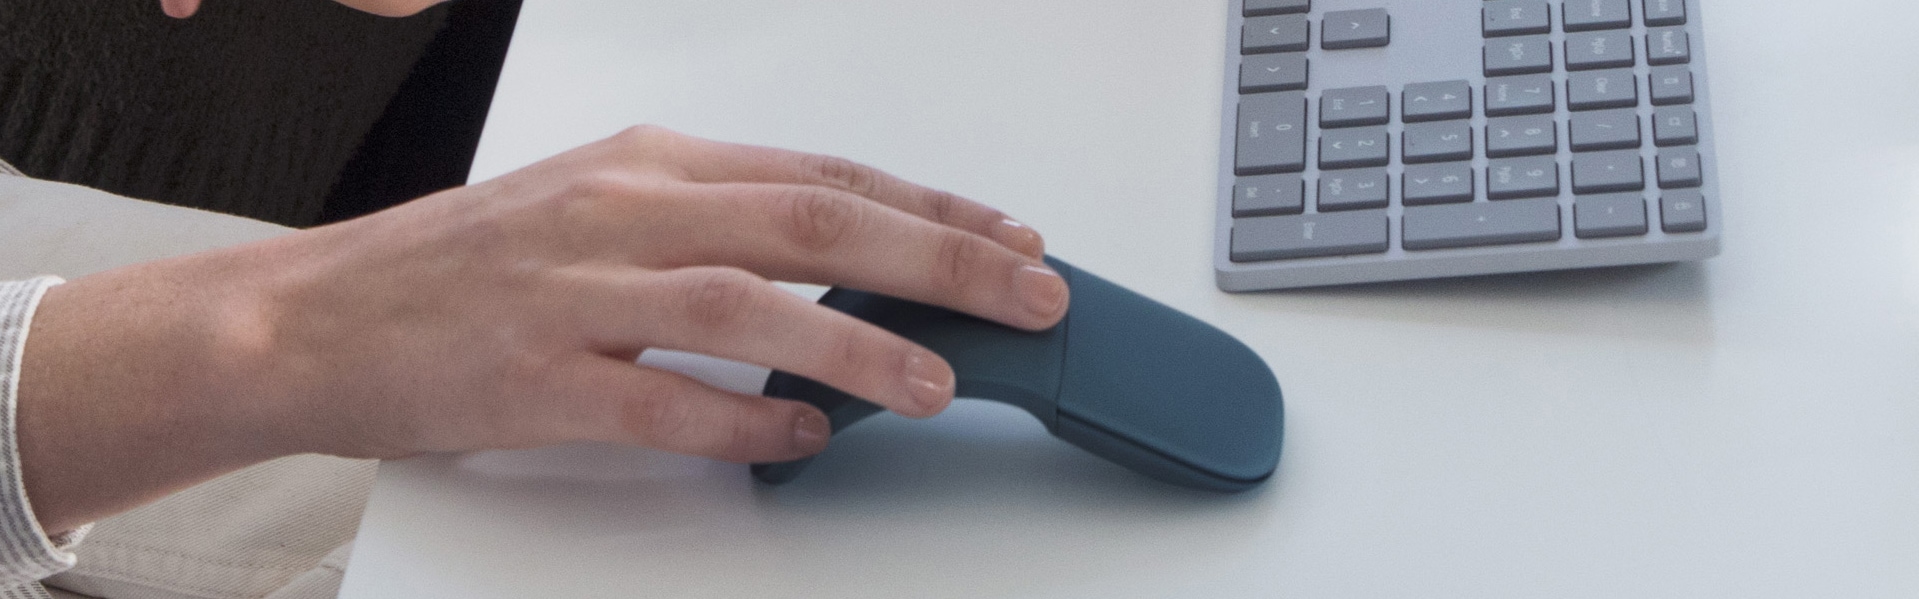 A Person Uses Surface Arc Mouse In Cobalt Blue